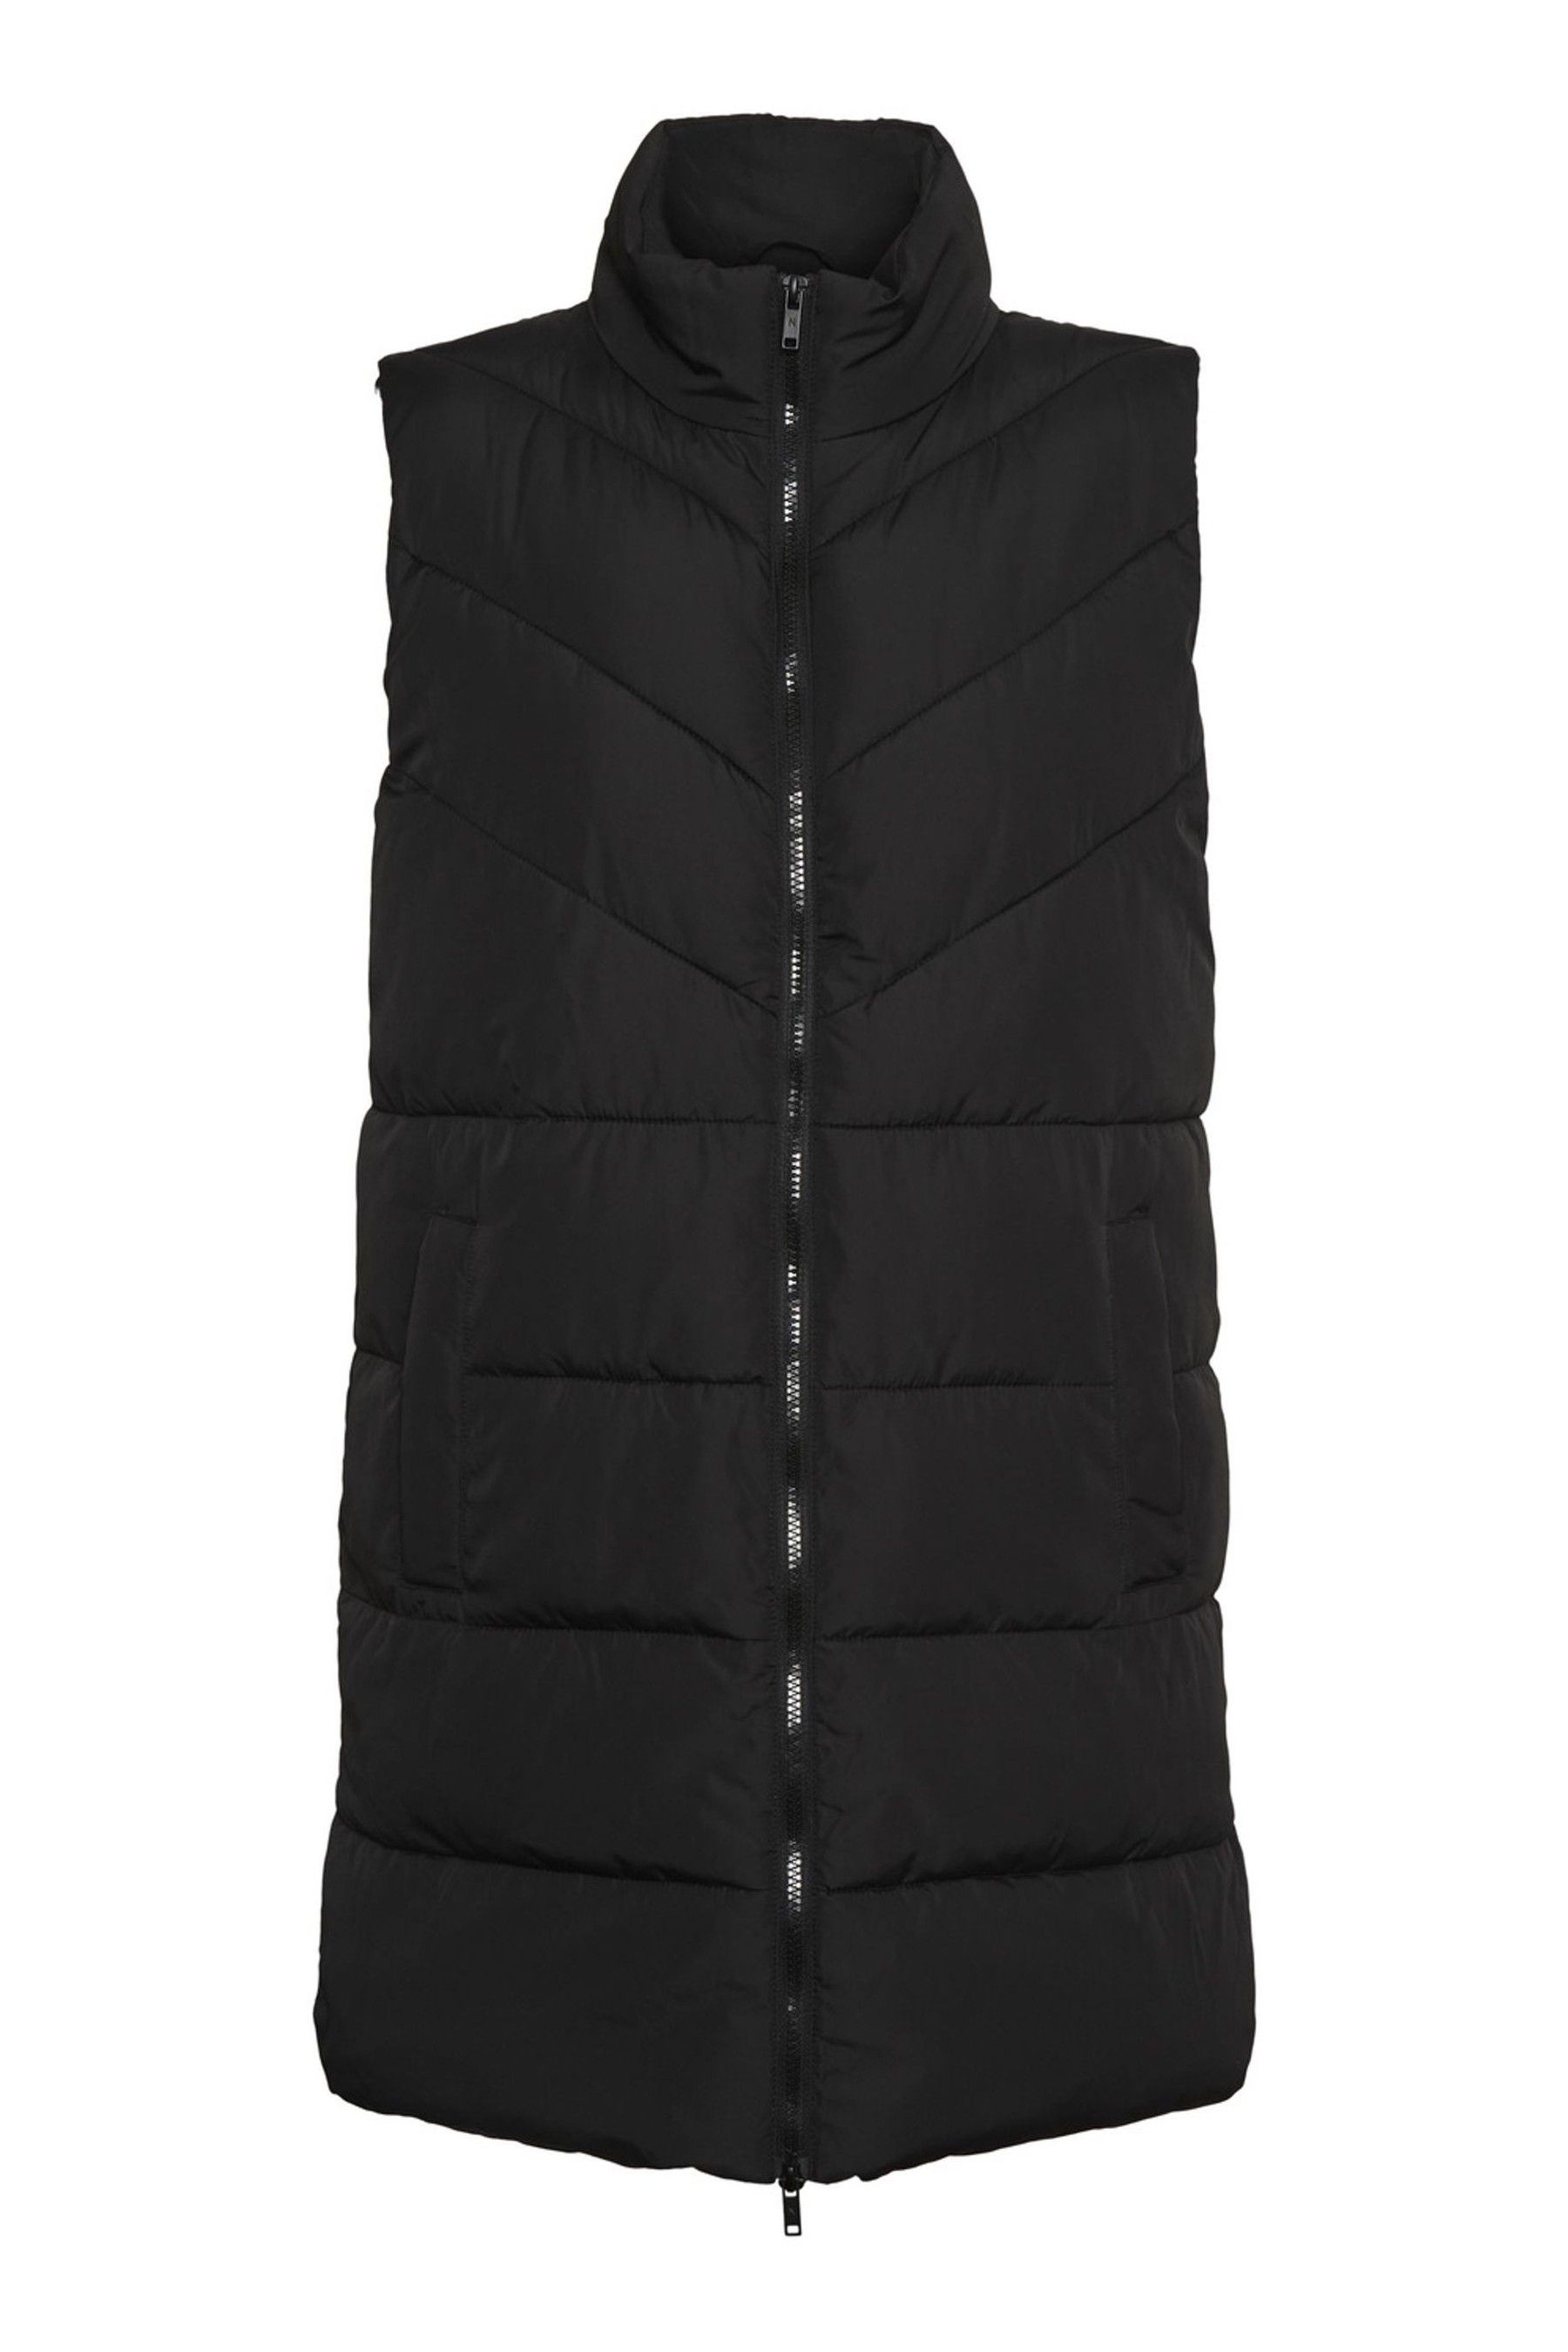 Buy NOISY MAY Black Longline Gilet from the Next UK online shop